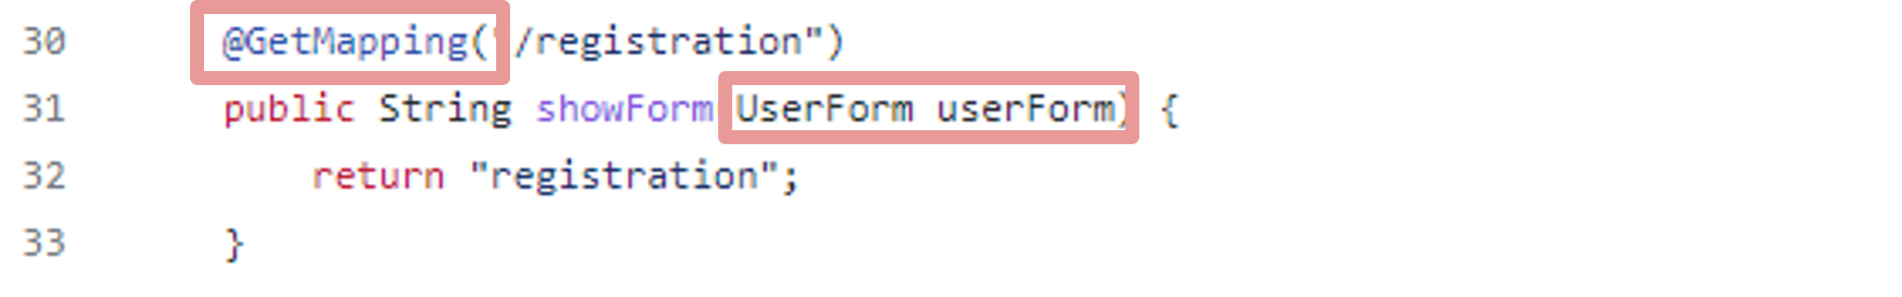 Vulnerable POJO data binding functionality to `UserForm` object. (From WebGoat Github)